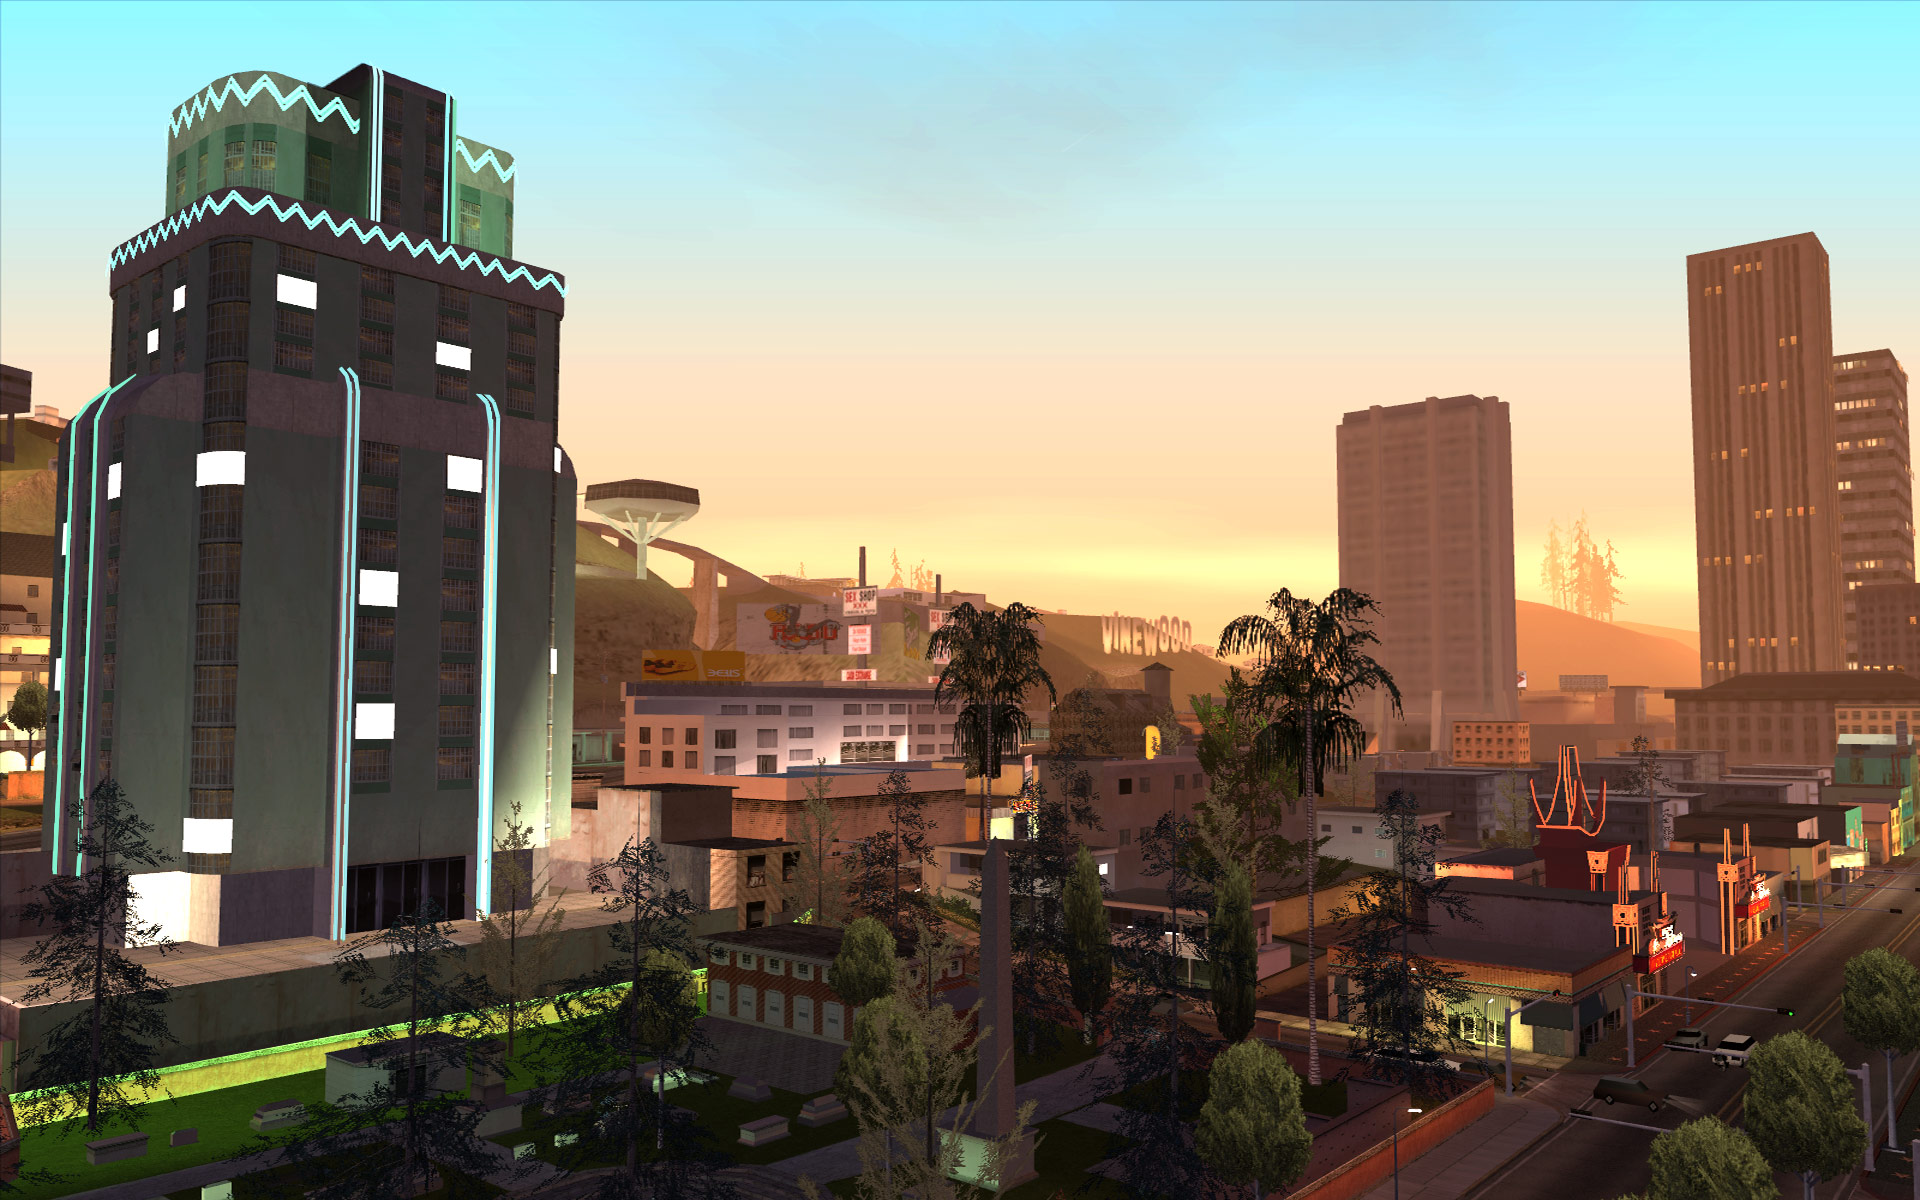 GTA: Cityscapes and brightly lit apartment buildings of San Andreas